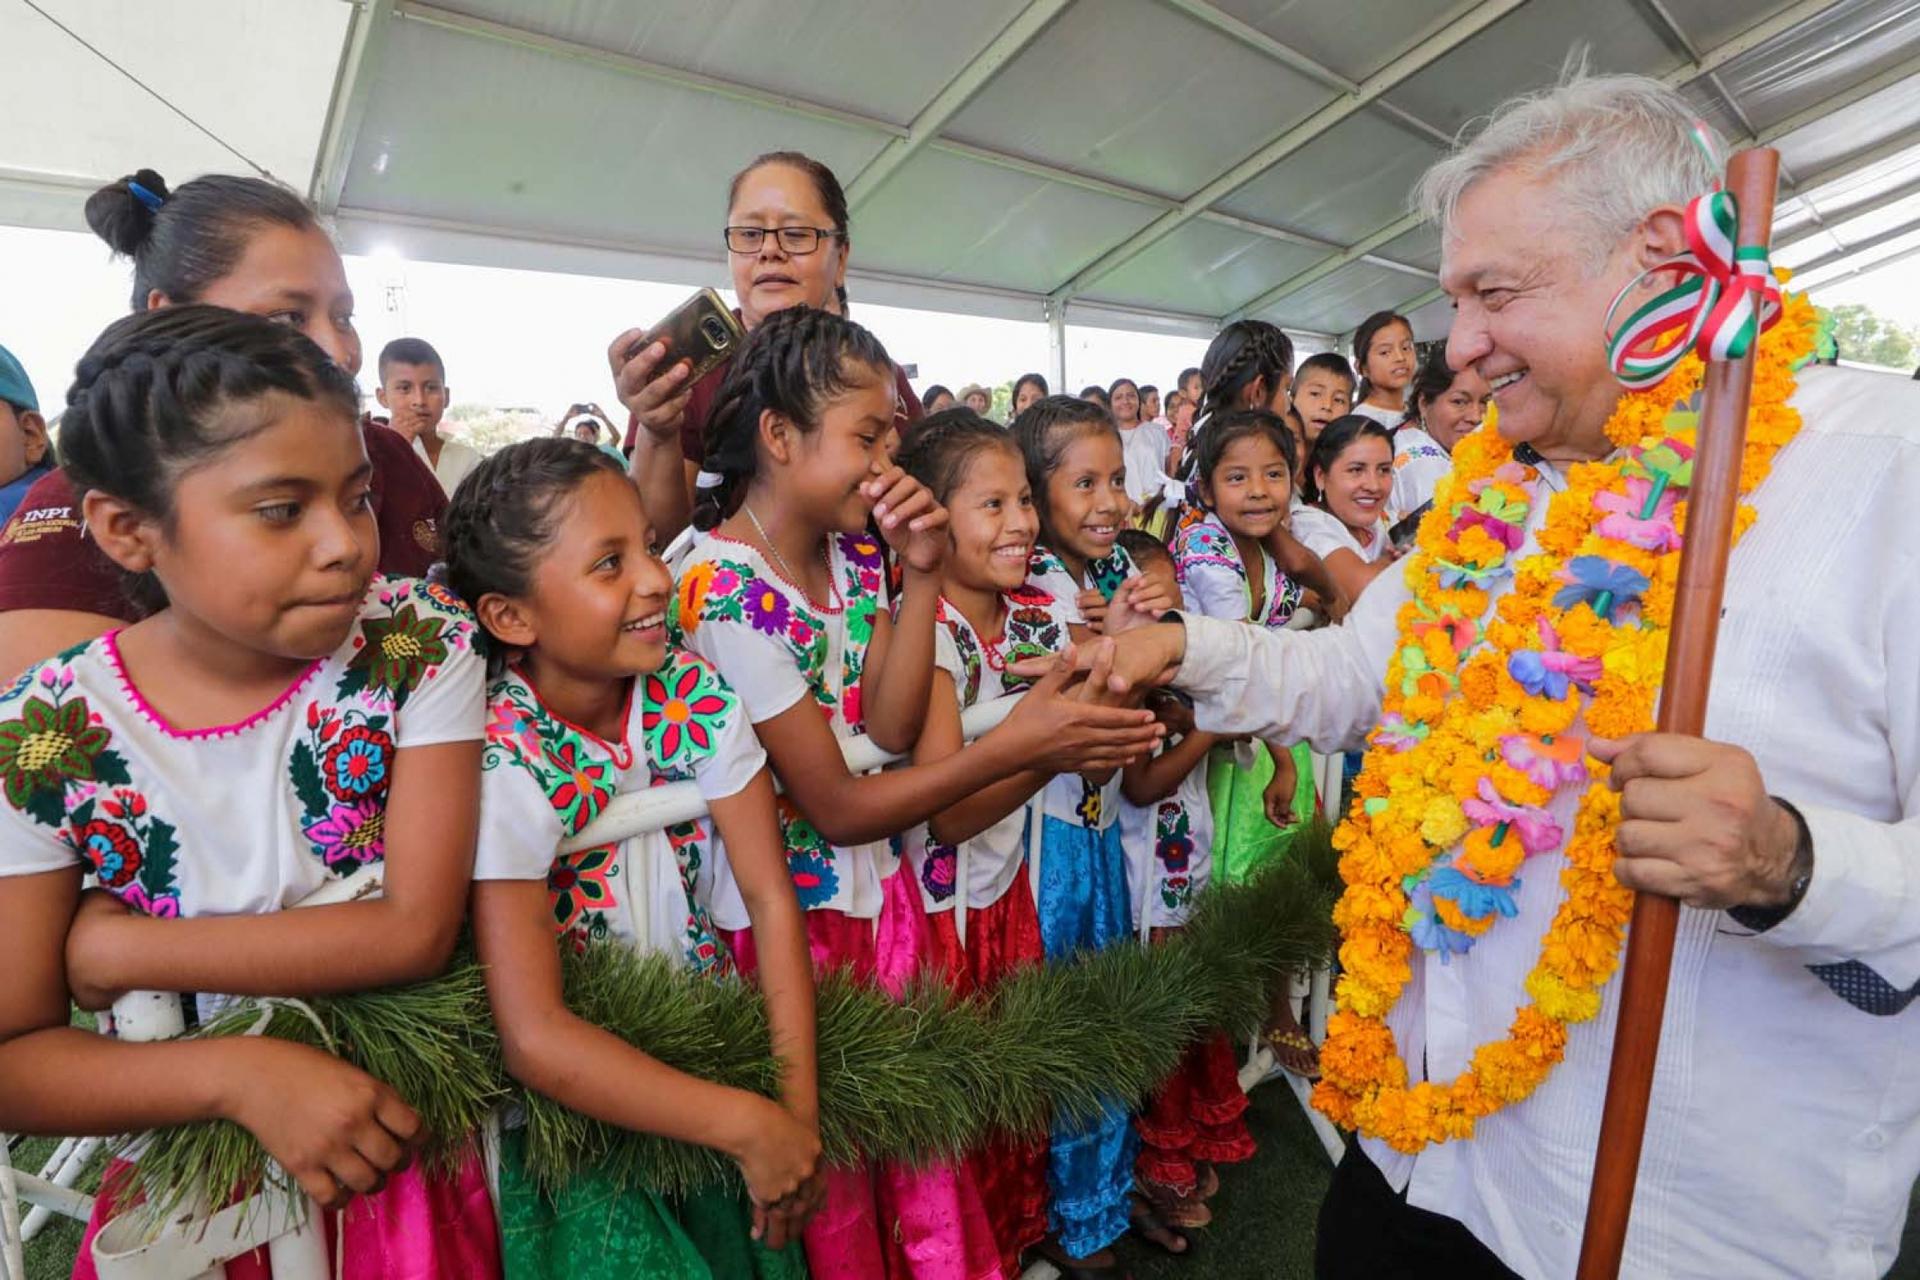 Mexico's President Andres Manuel Lopez Obrador shakes hands with girls while visiting towns in the southwestern state of Guerrero, as Mexico's health ministry urged people to mantain a "healthy distance" to avoid infection and spread of coronavirus.